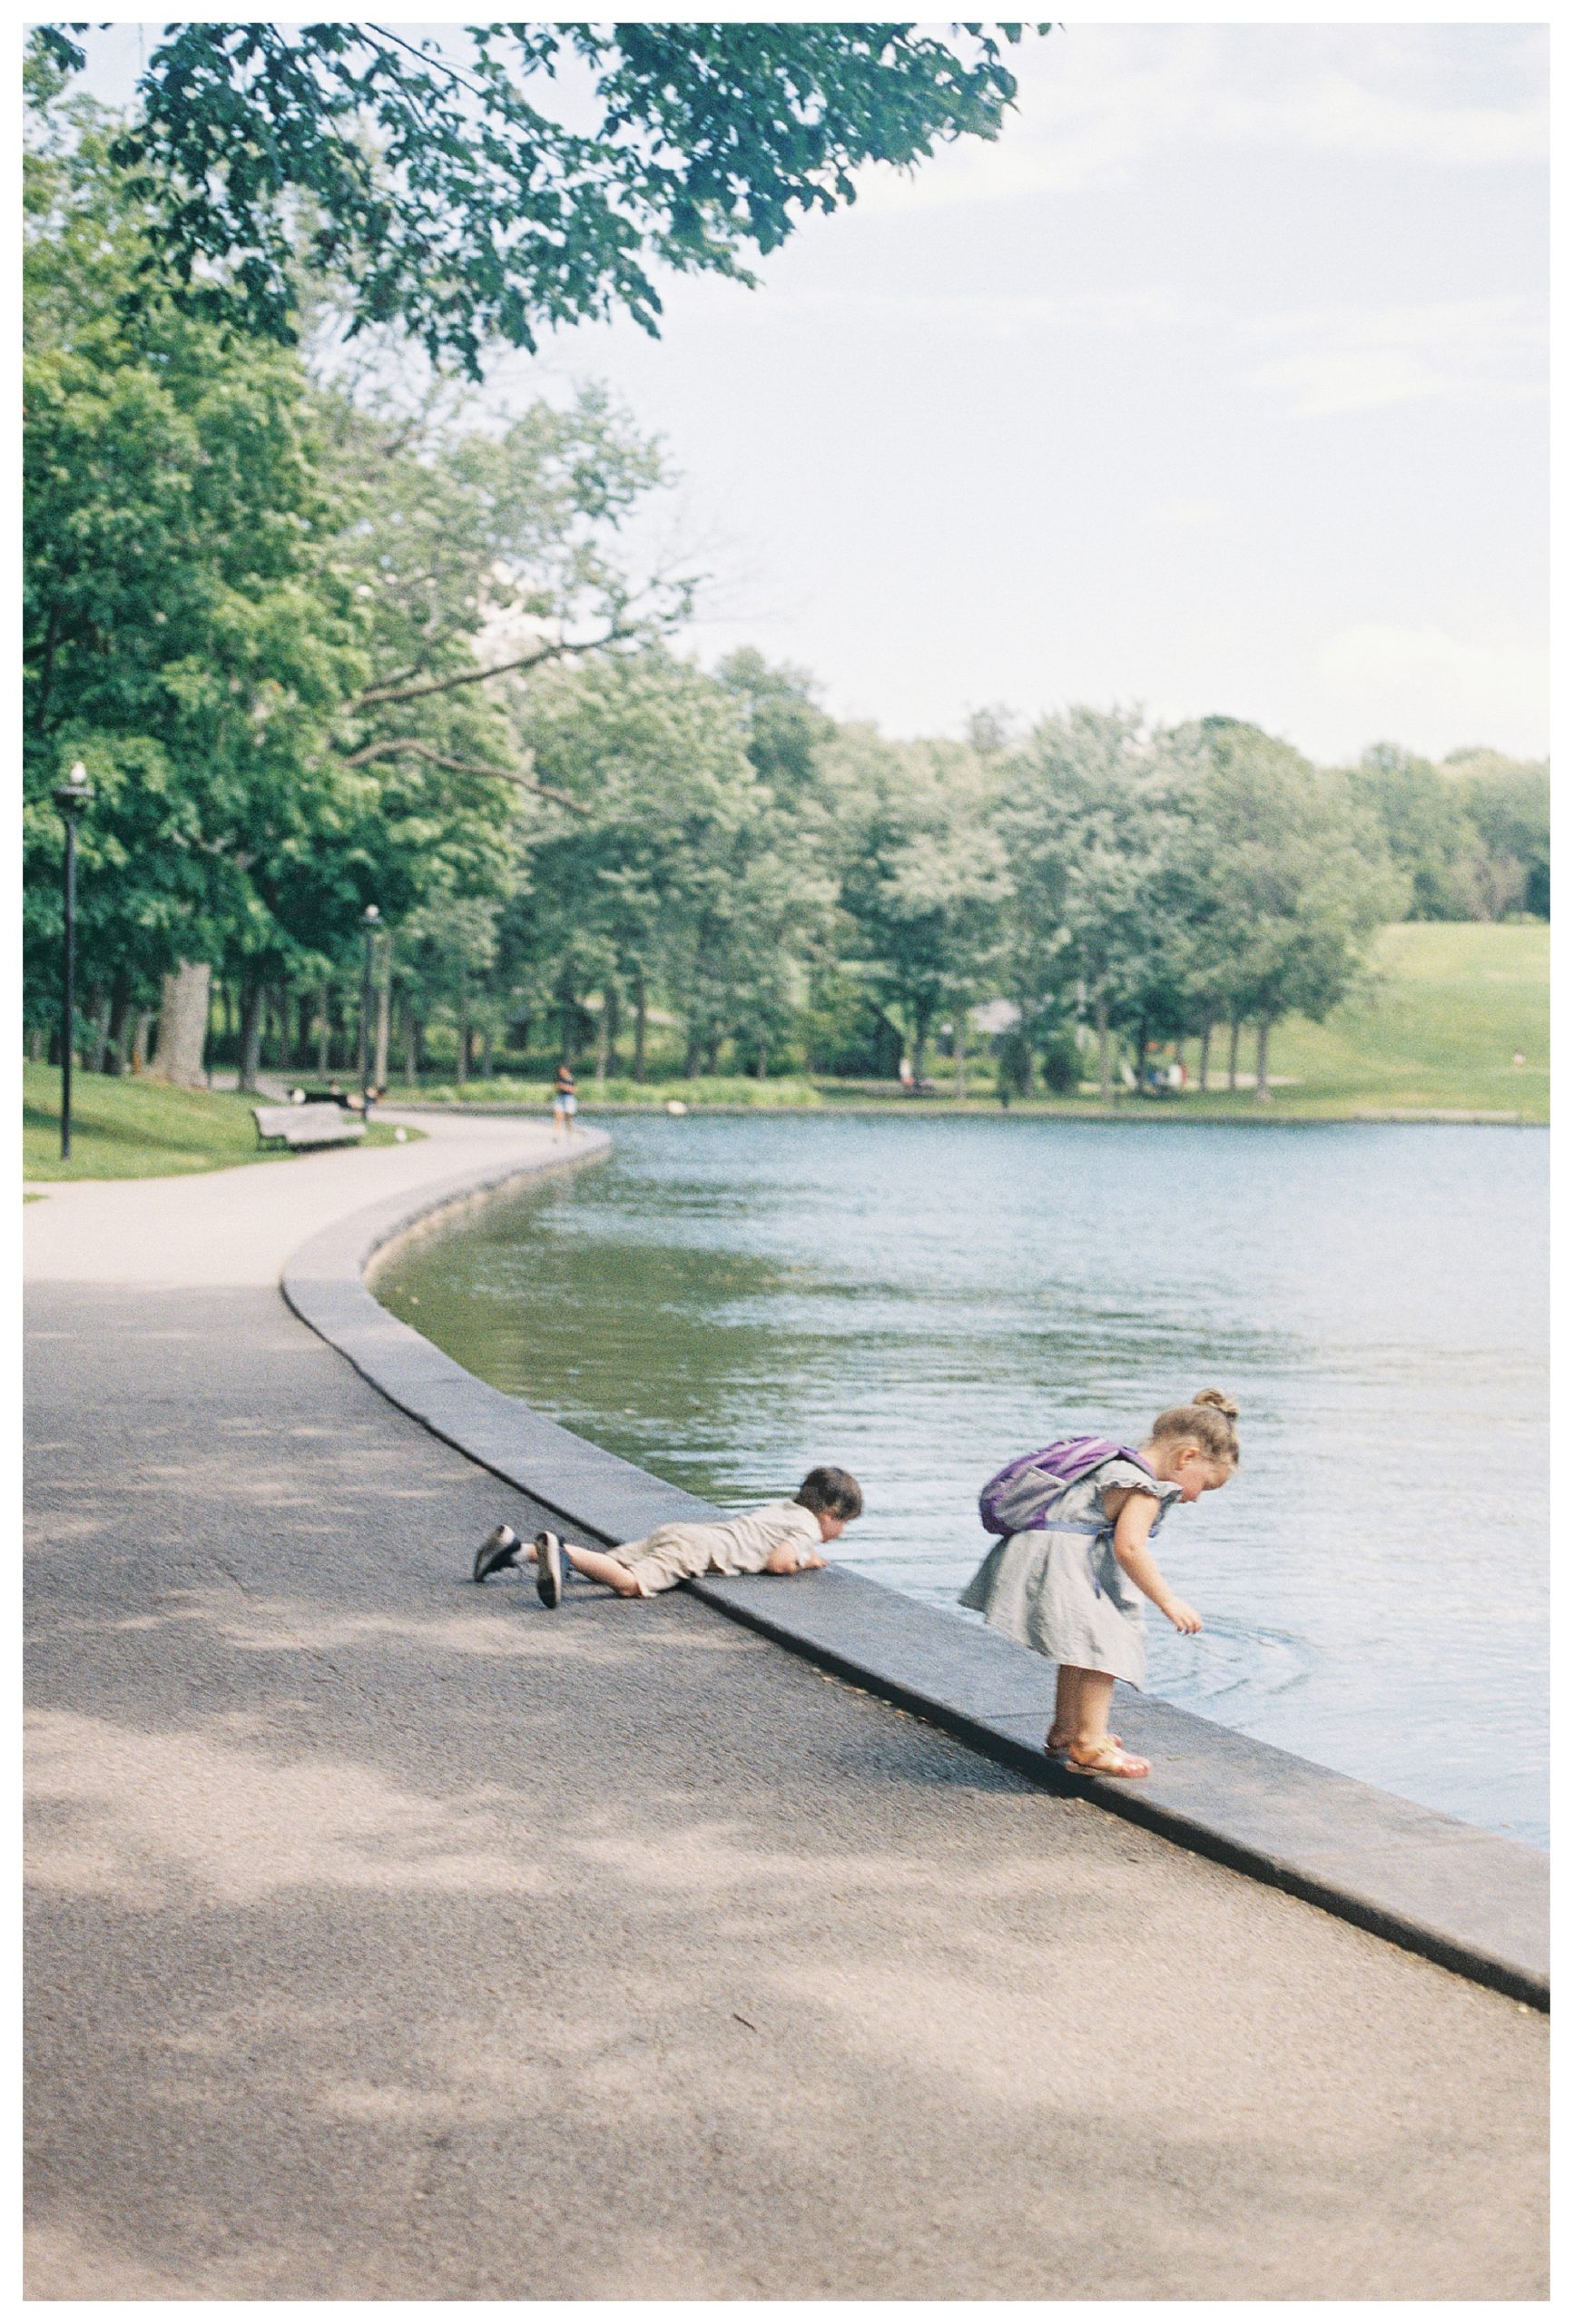 Two young children lean over a lake in   Mont-Royal in Montreal, Canada